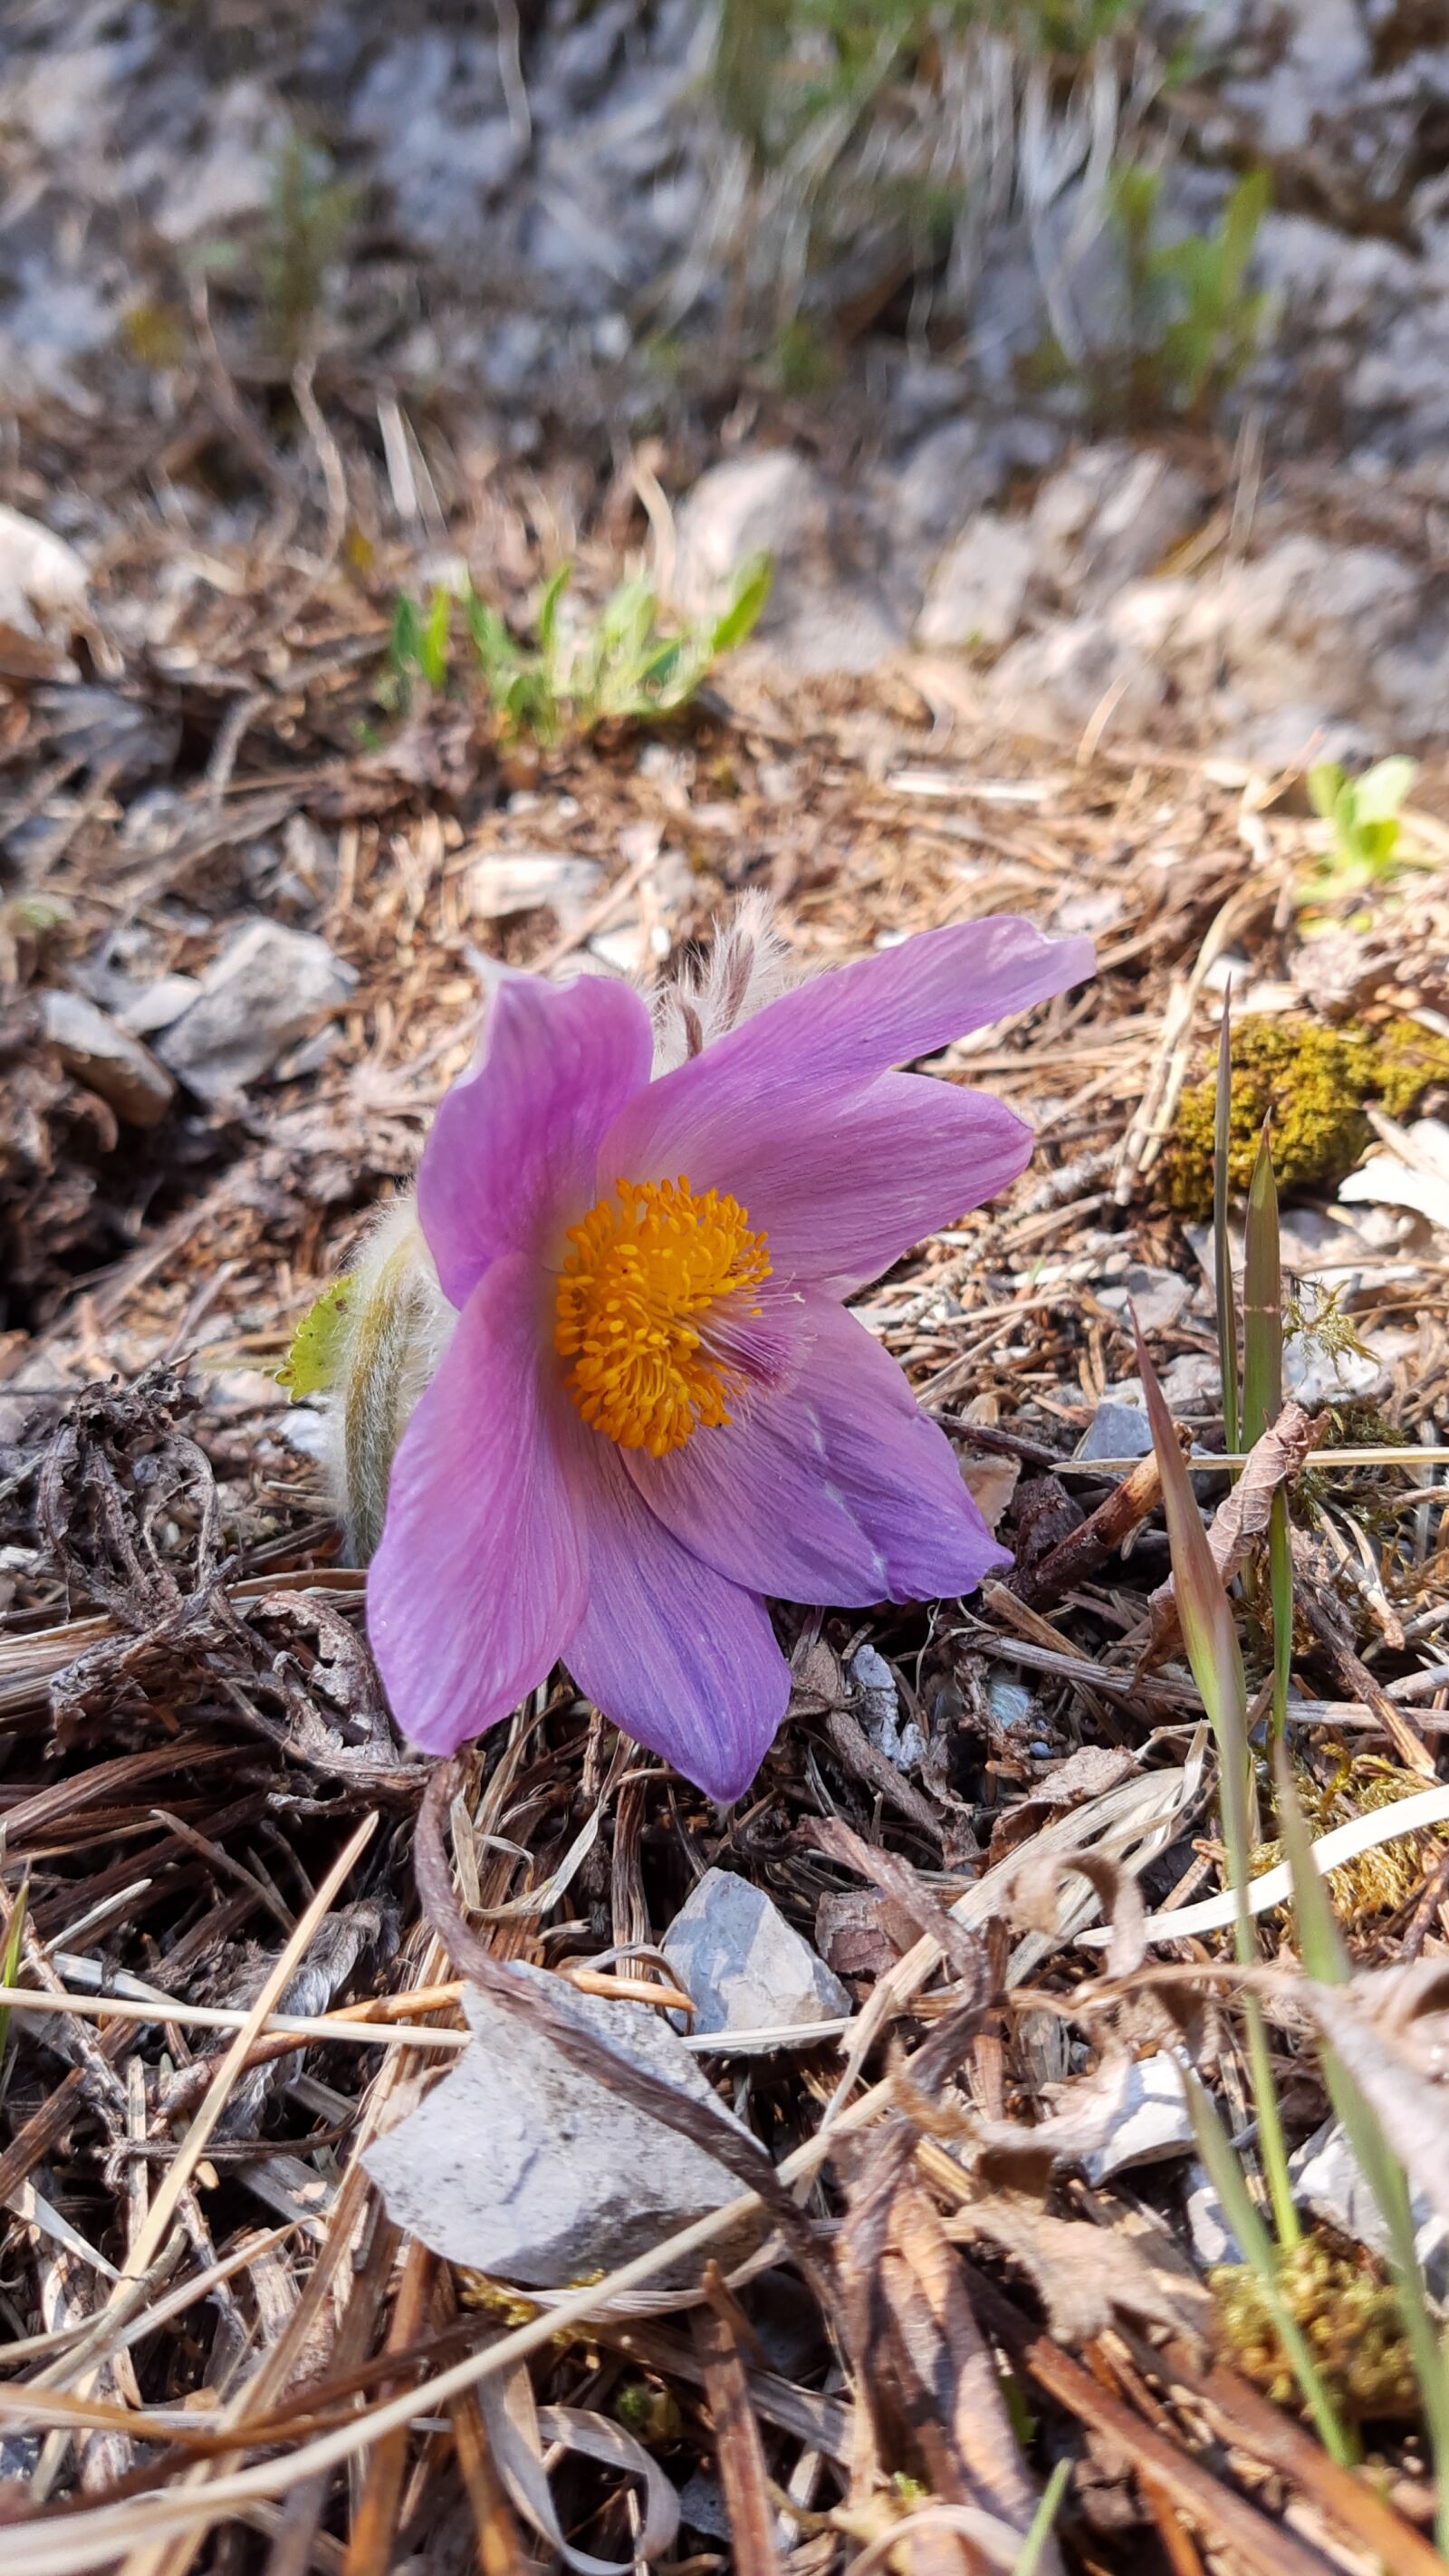 Motorola ONE VISION sample photo. Flower, forest, nature photography